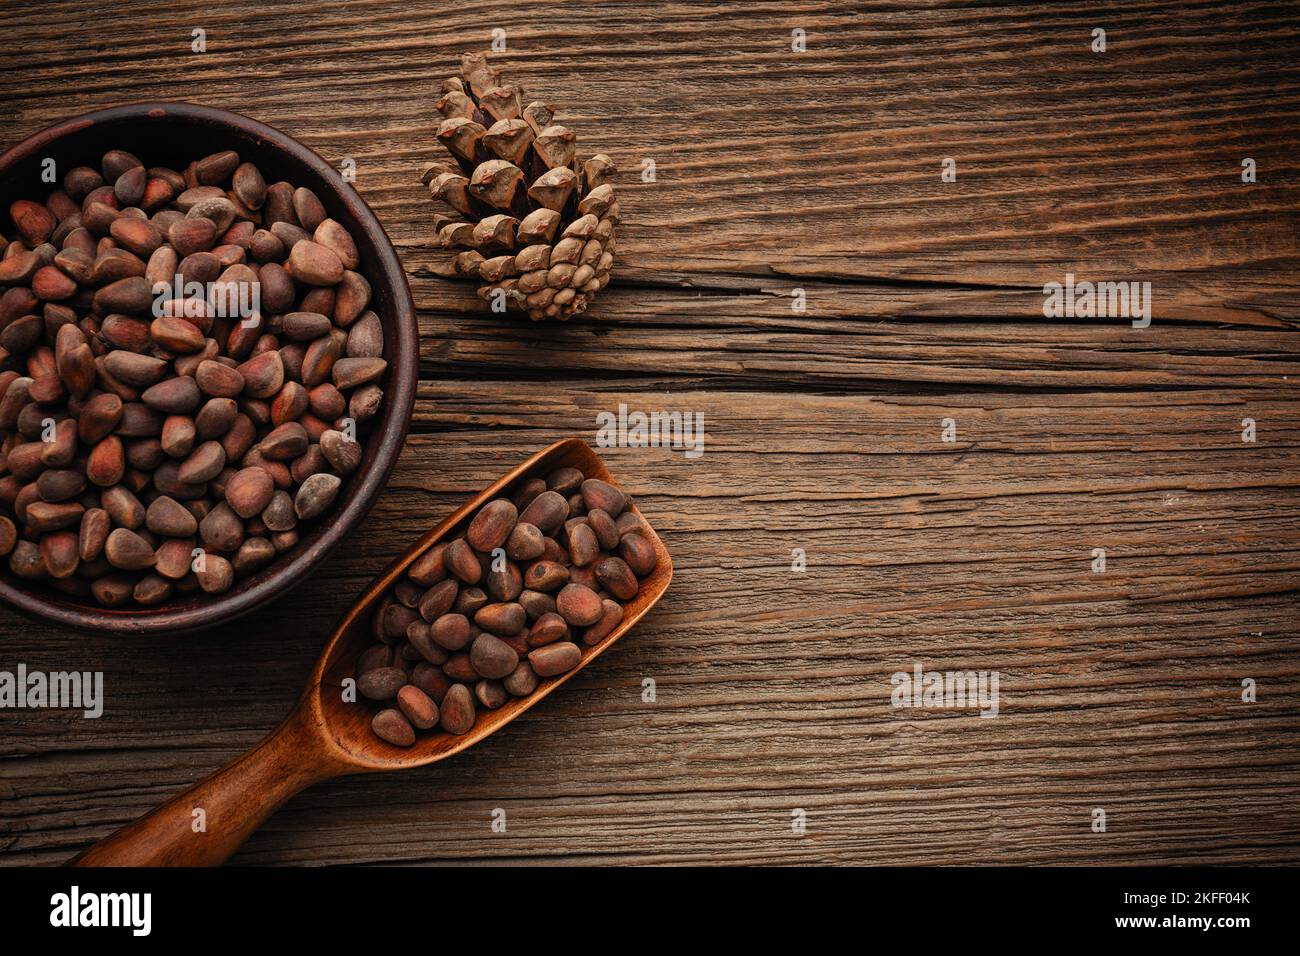 Siberian pine nuts and needles branch on a wooden table with a place for your text. Stock Photo